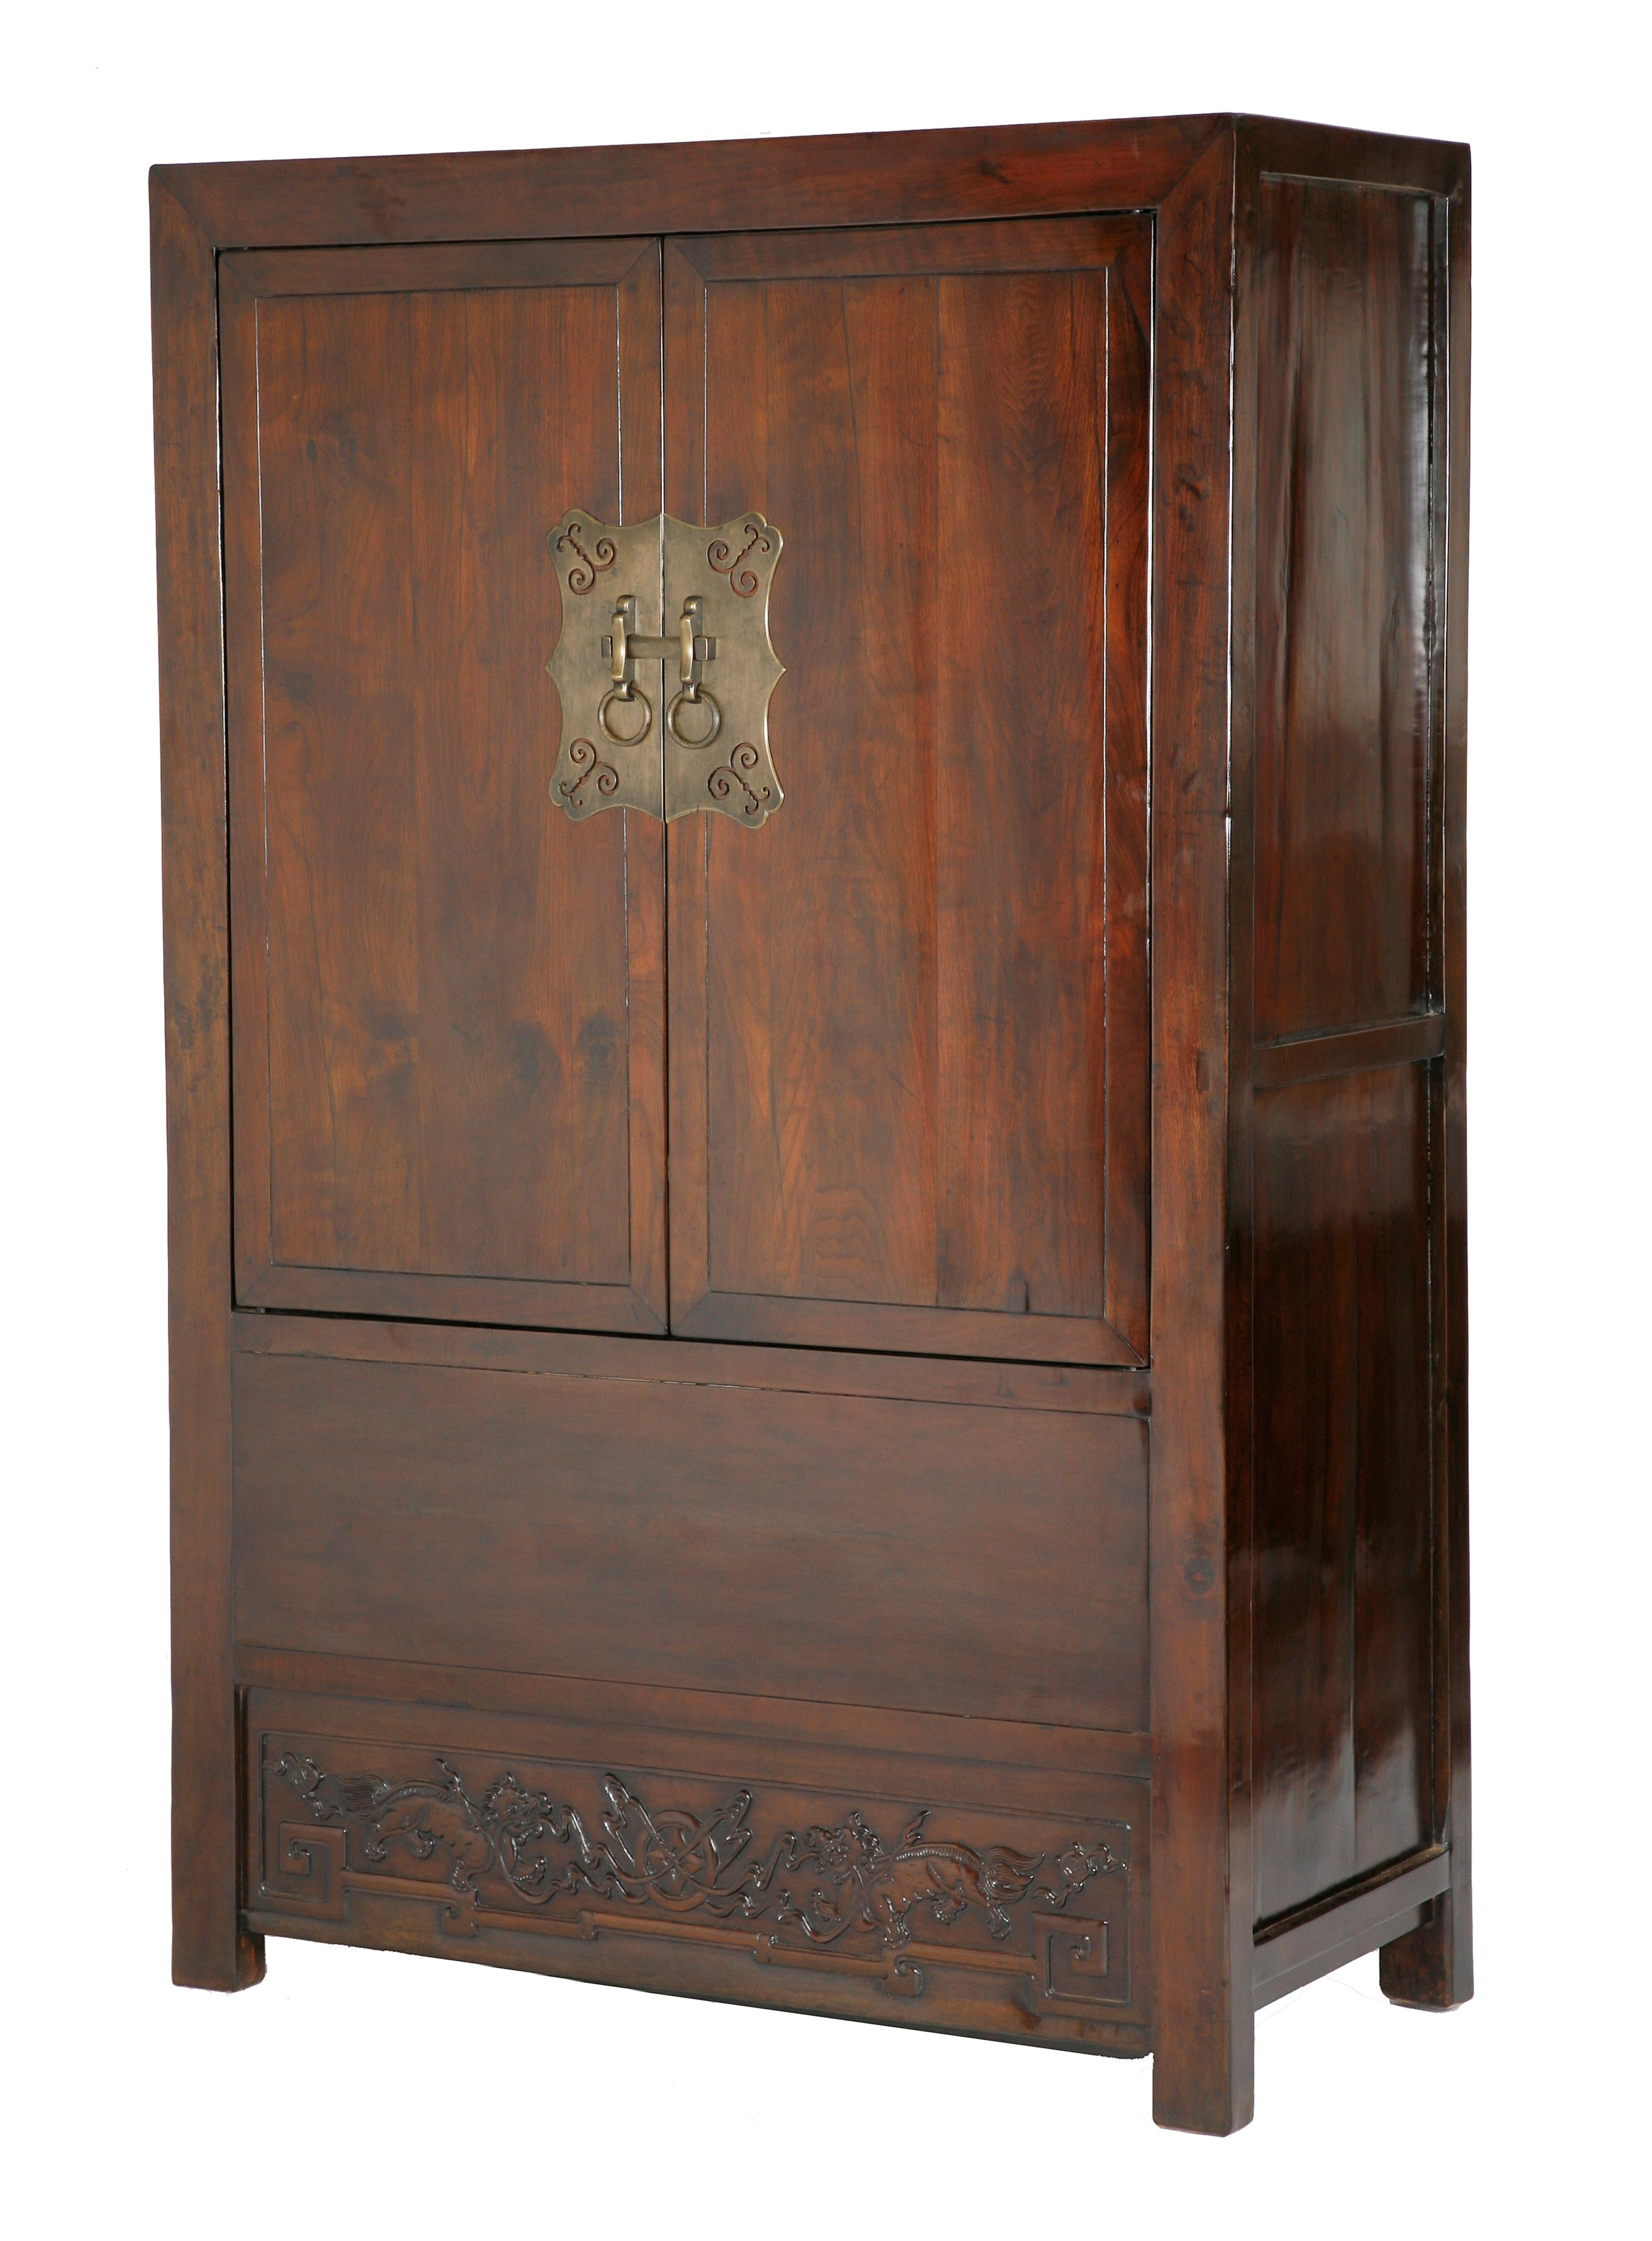 Chinese Antique Walnut Compound Cabinet, Relief-Carved Fu-Dogs, Chinoiserie